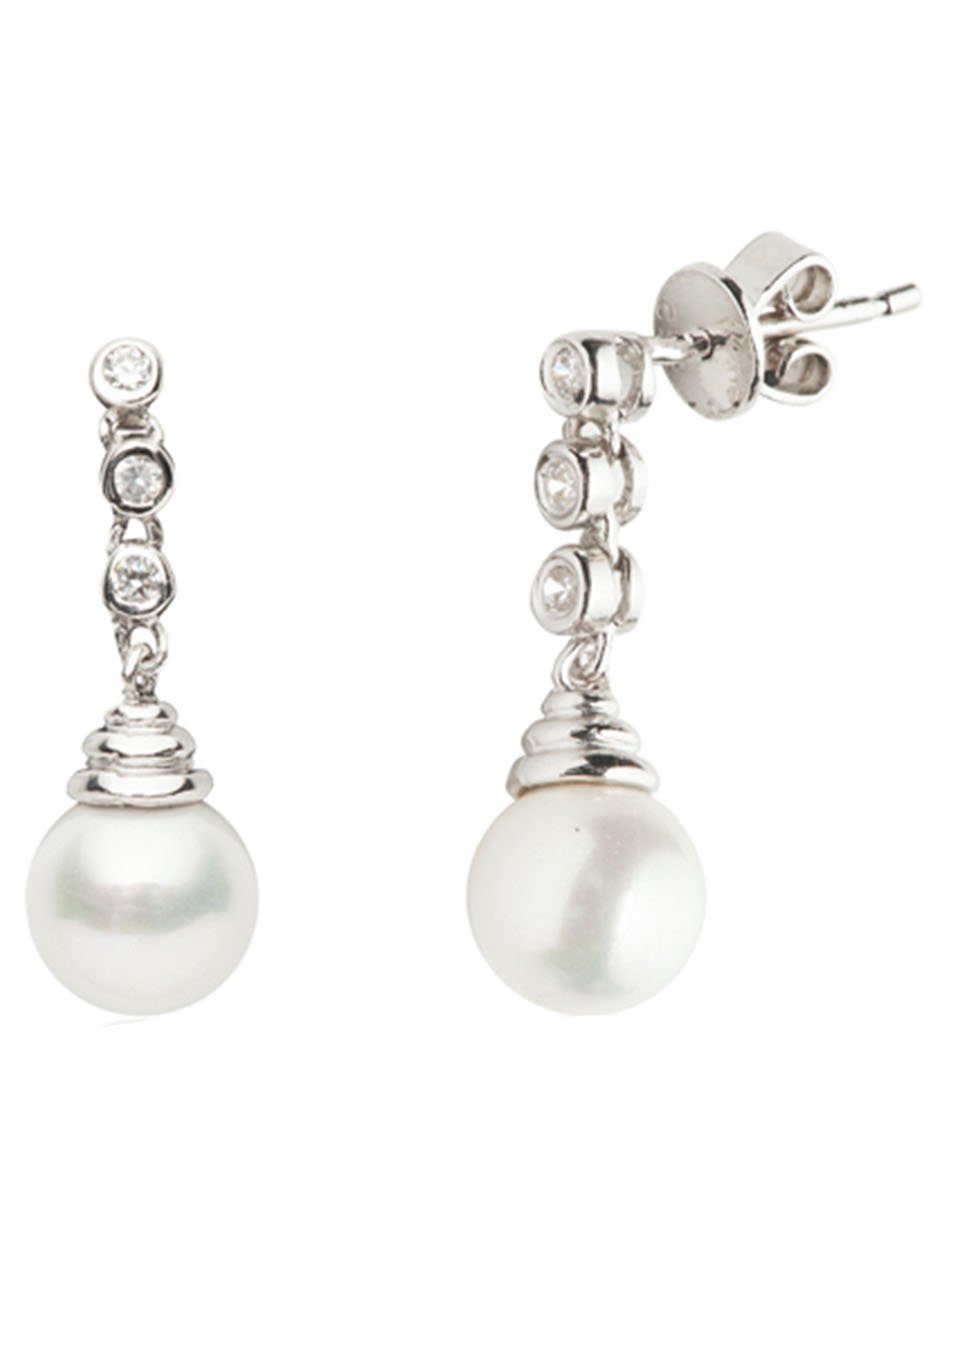 UNIKE JEWELLERY Paar Ohrstecker CLASSY PEARL, UK.BR.1204.0001, mit Zirkonia (synth) - mit Perle (synth)